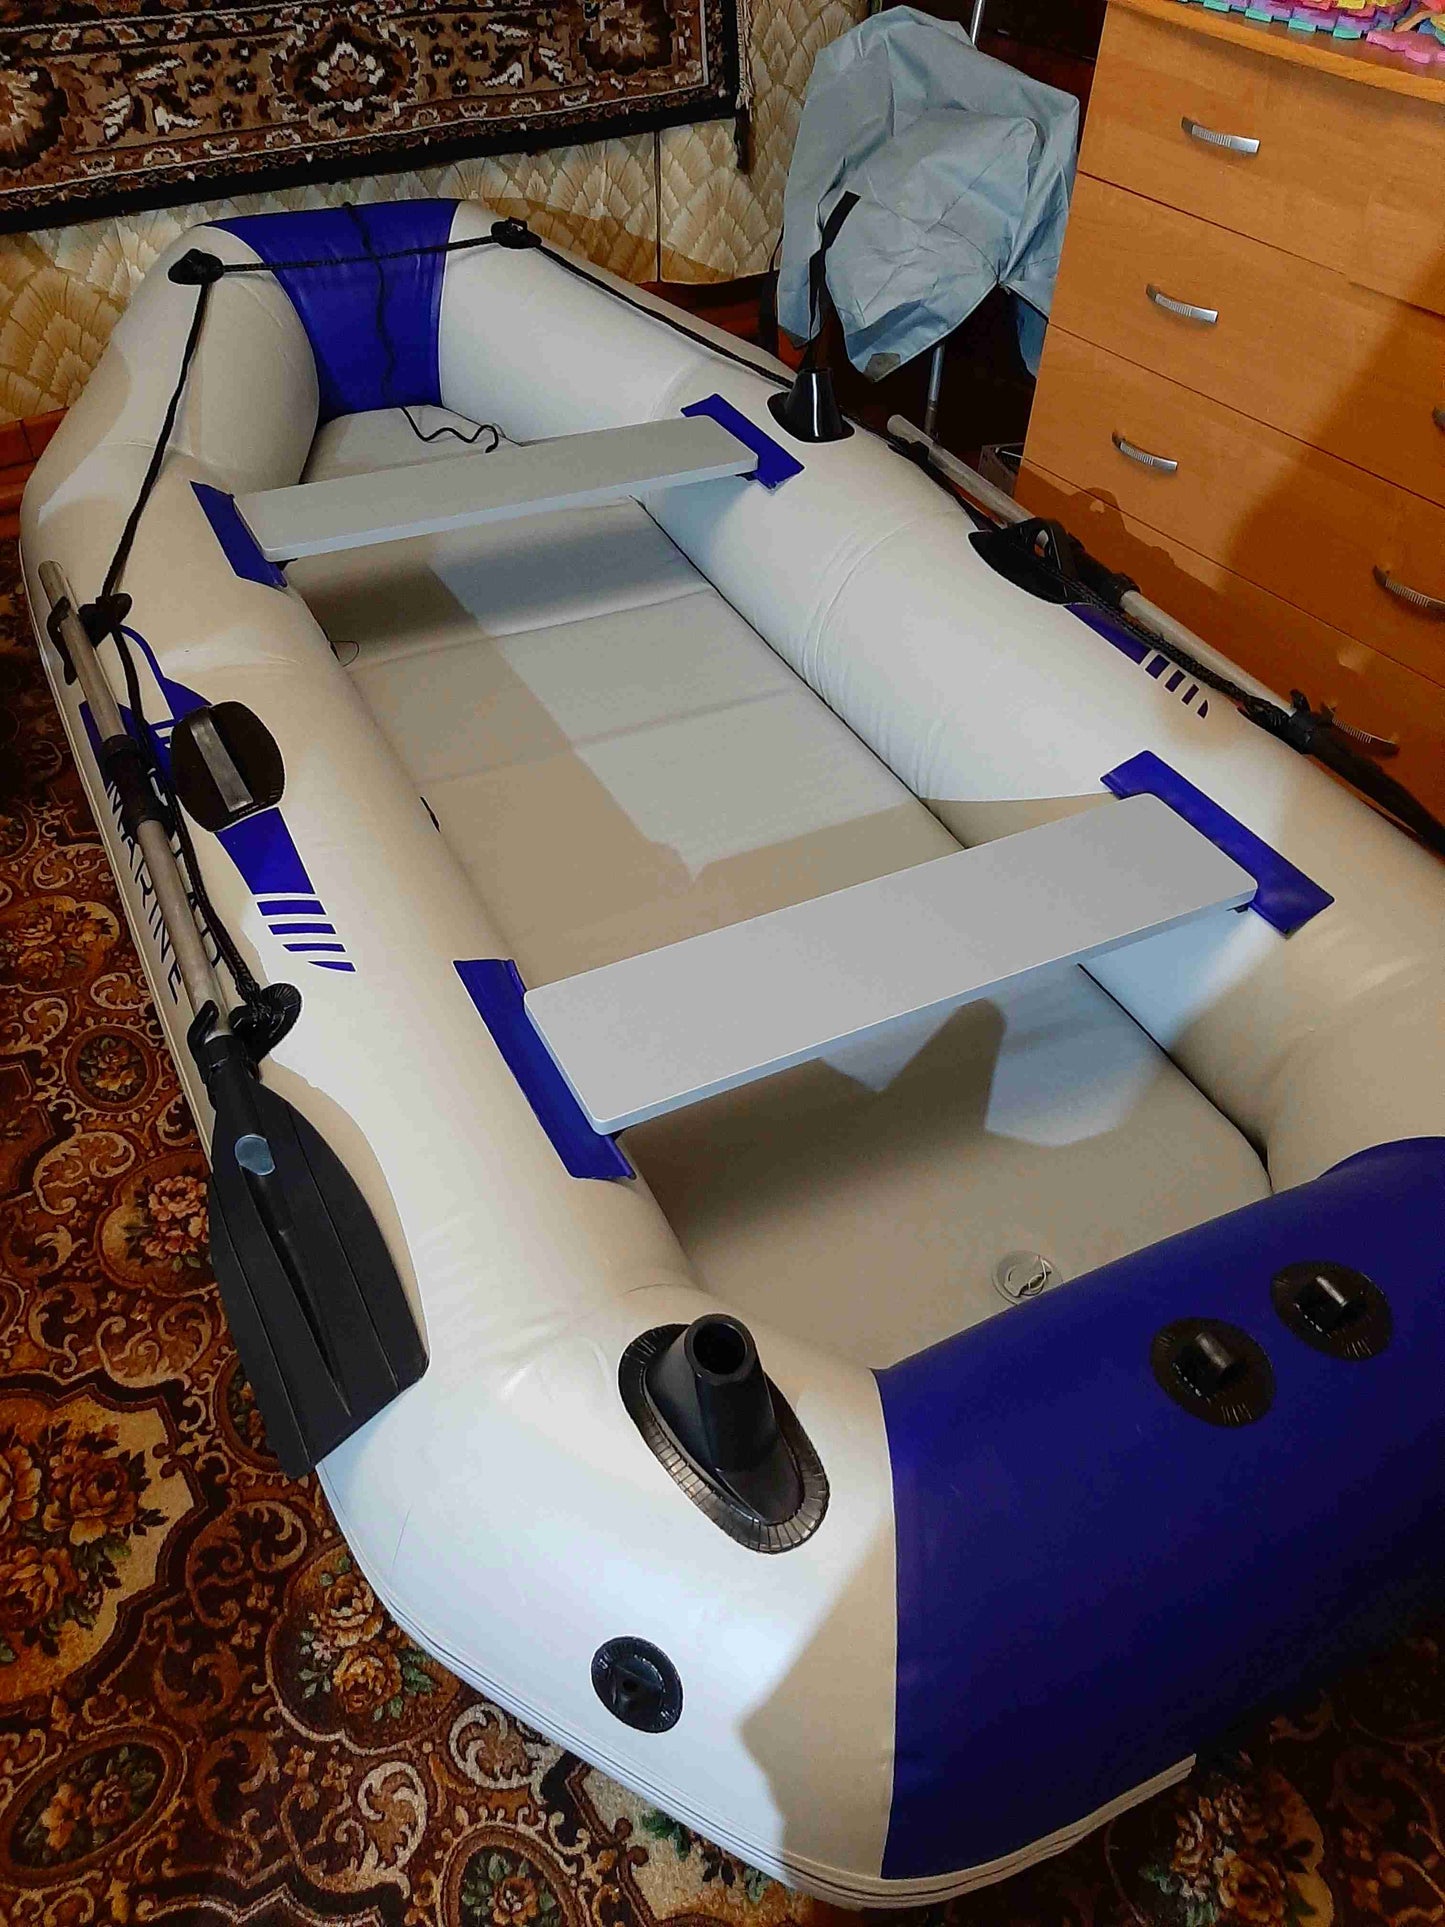 2/6 Person PVC 3 Layer Inflatable Laminated Wear-Resistant Boats